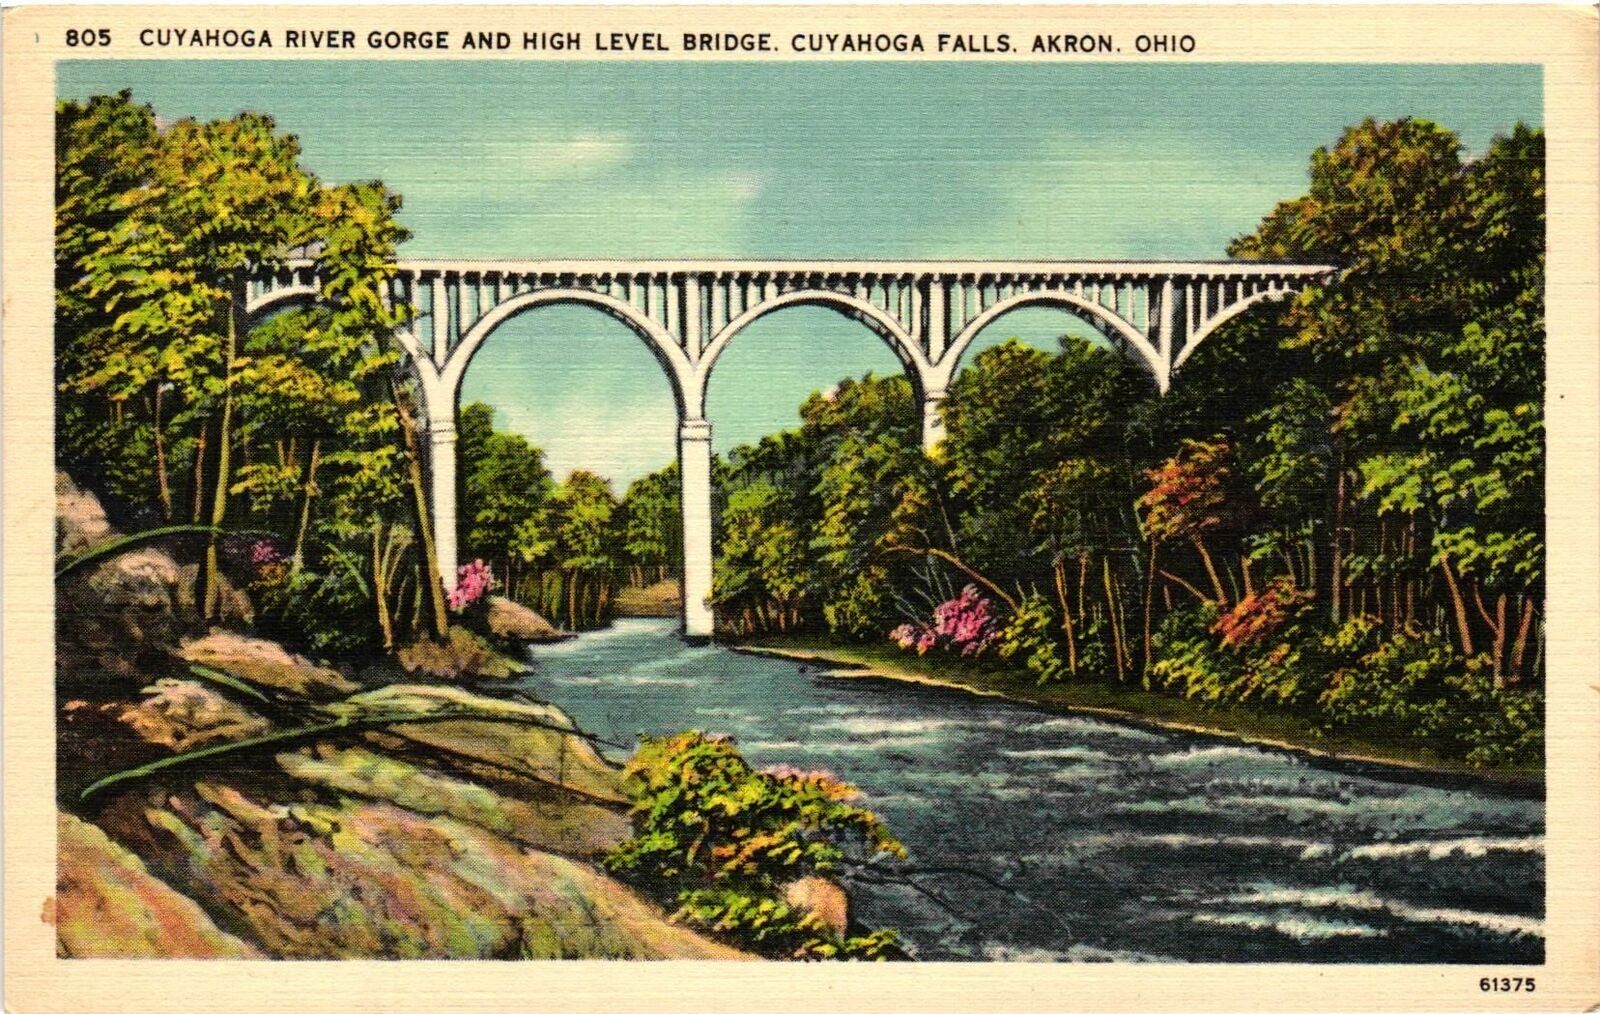 Vintage Postcard- Cuyahoga River Gorge and Bridge, Akron, OH Early 1900s